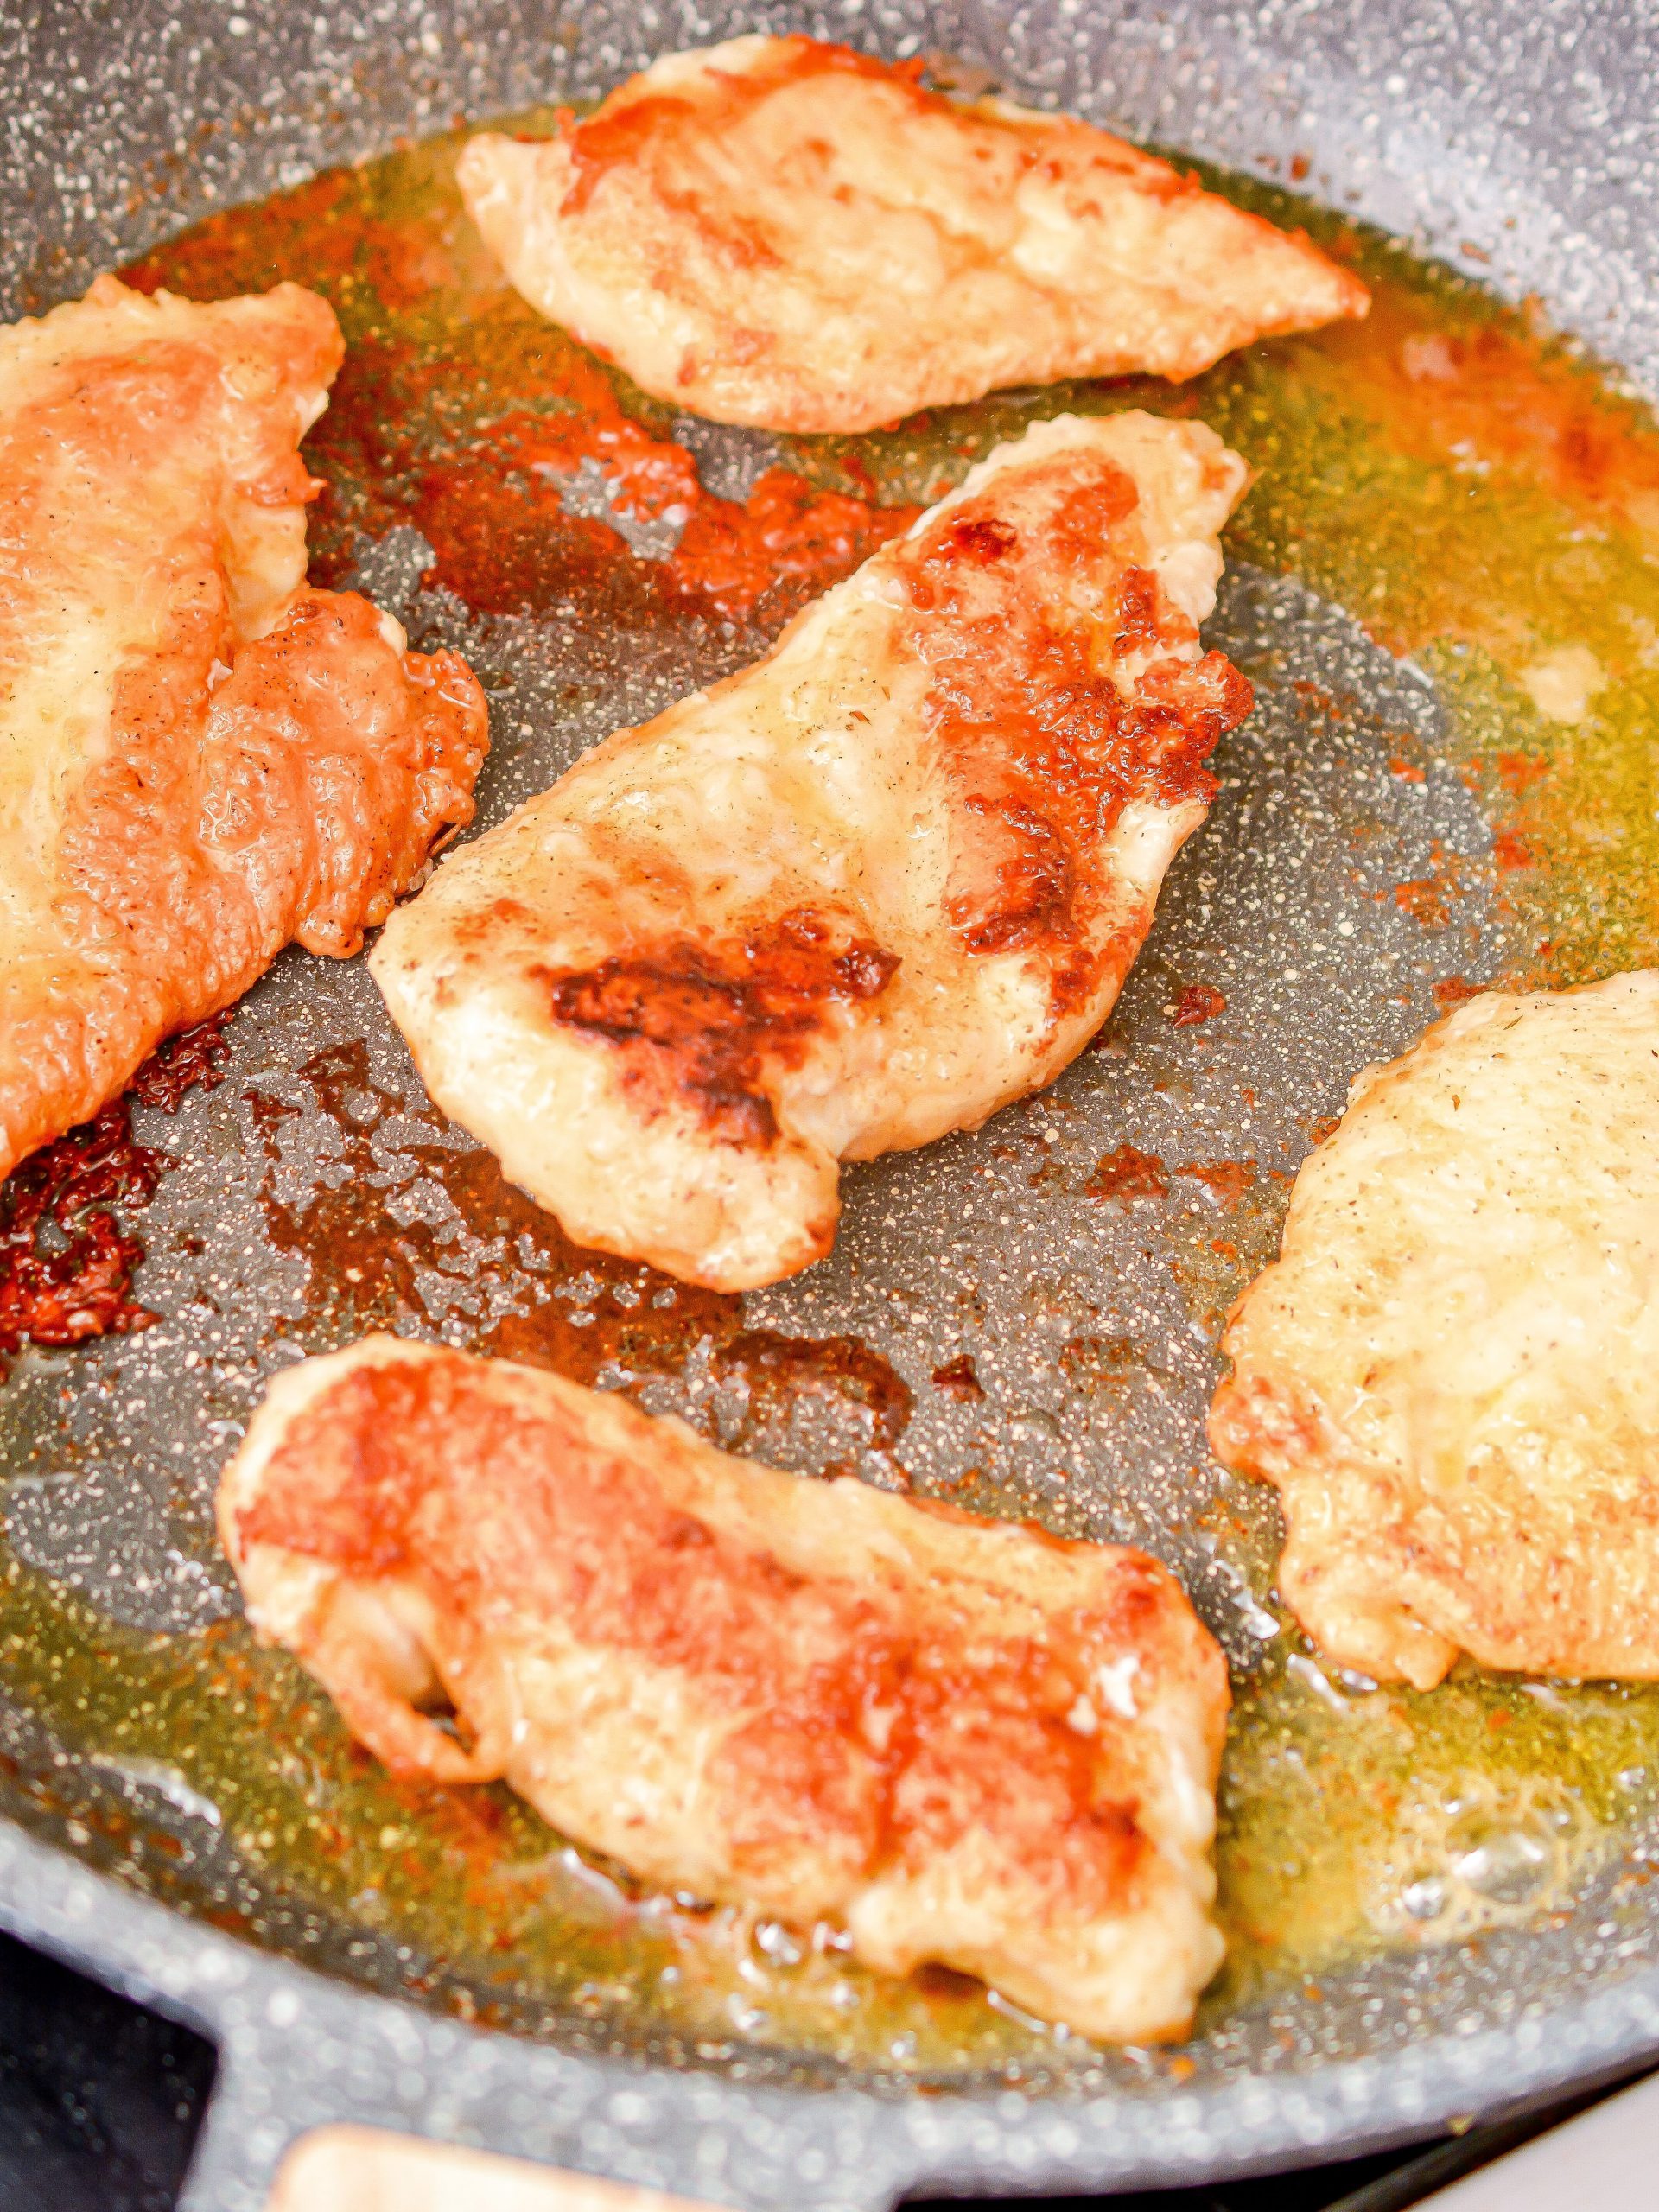 Heat the oil in a large skillet over medium-high heat on the stove and add the chicken. Saute until browned on each side and cooked through. Remove and set aside.